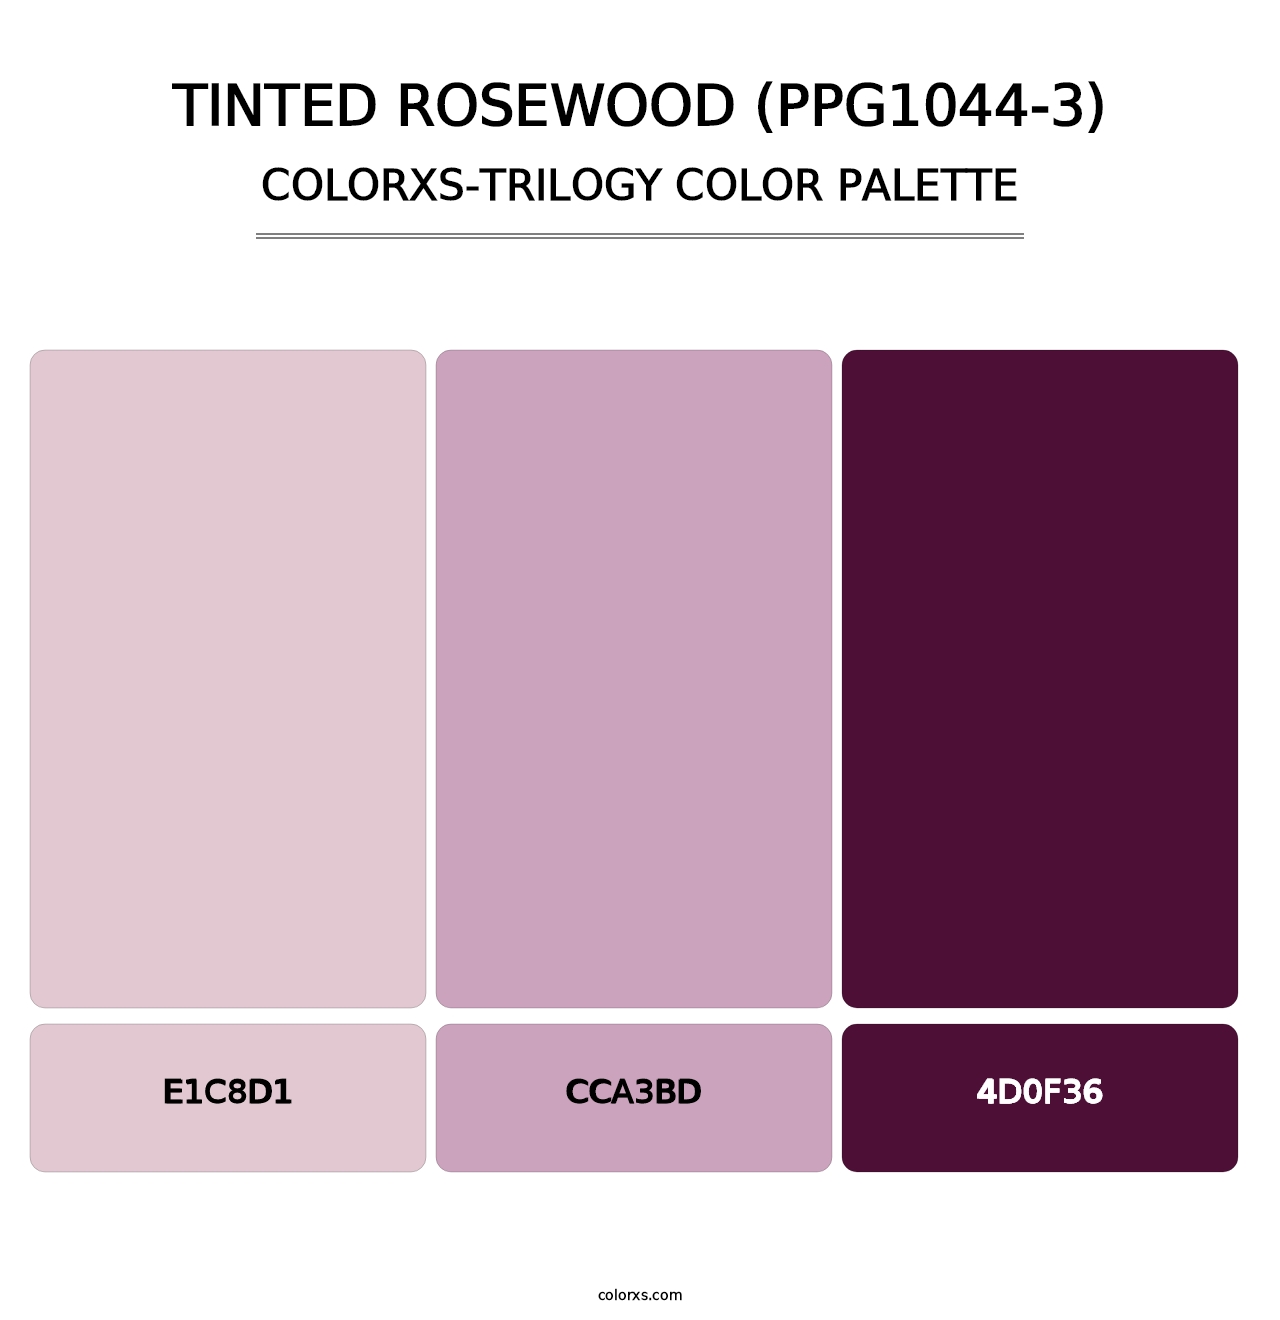 Tinted Rosewood (PPG1044-3) - Colorxs Trilogy Palette